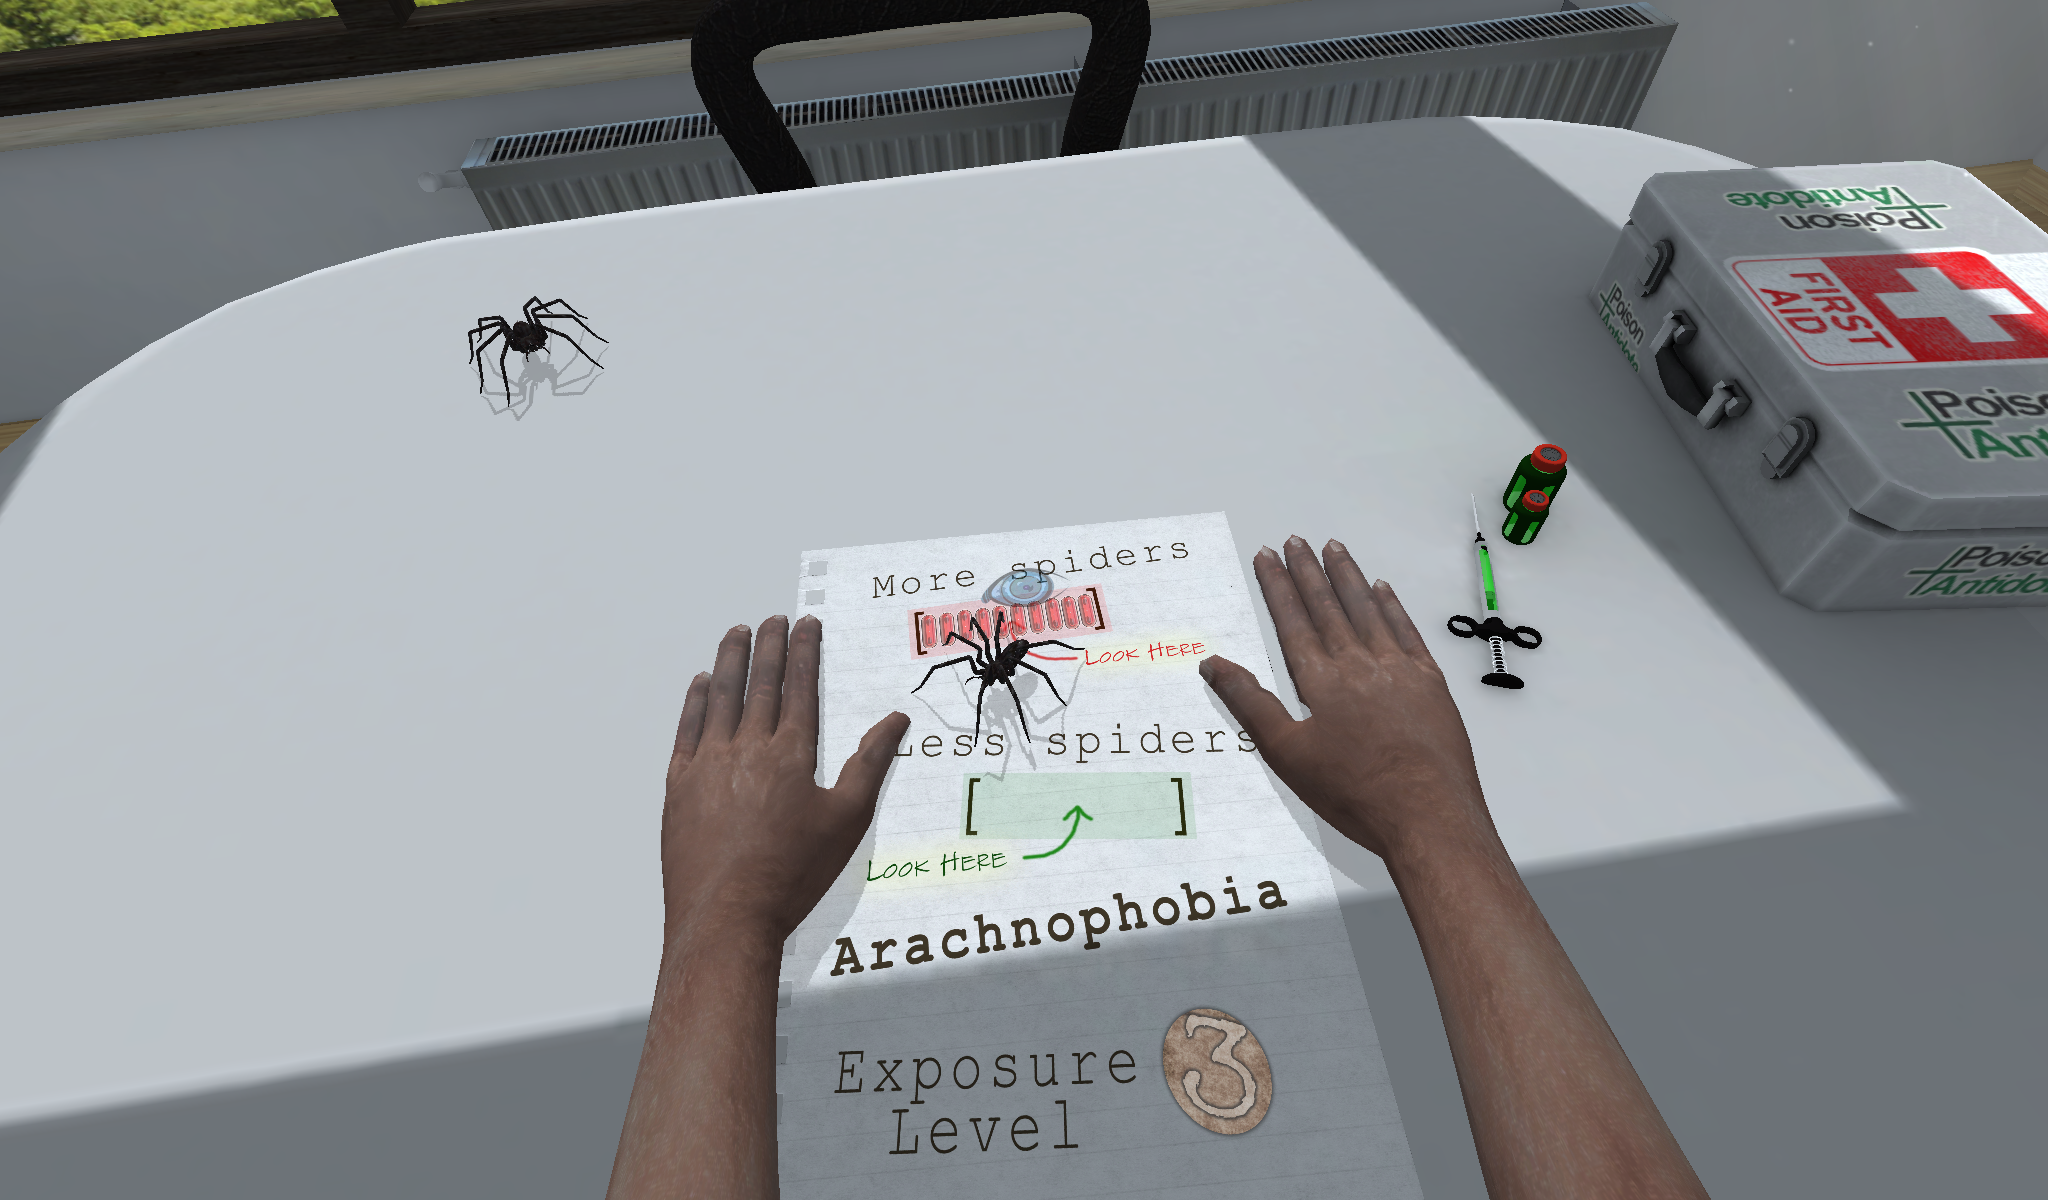 Arachnophobia treatment by exposure to virtual spiders